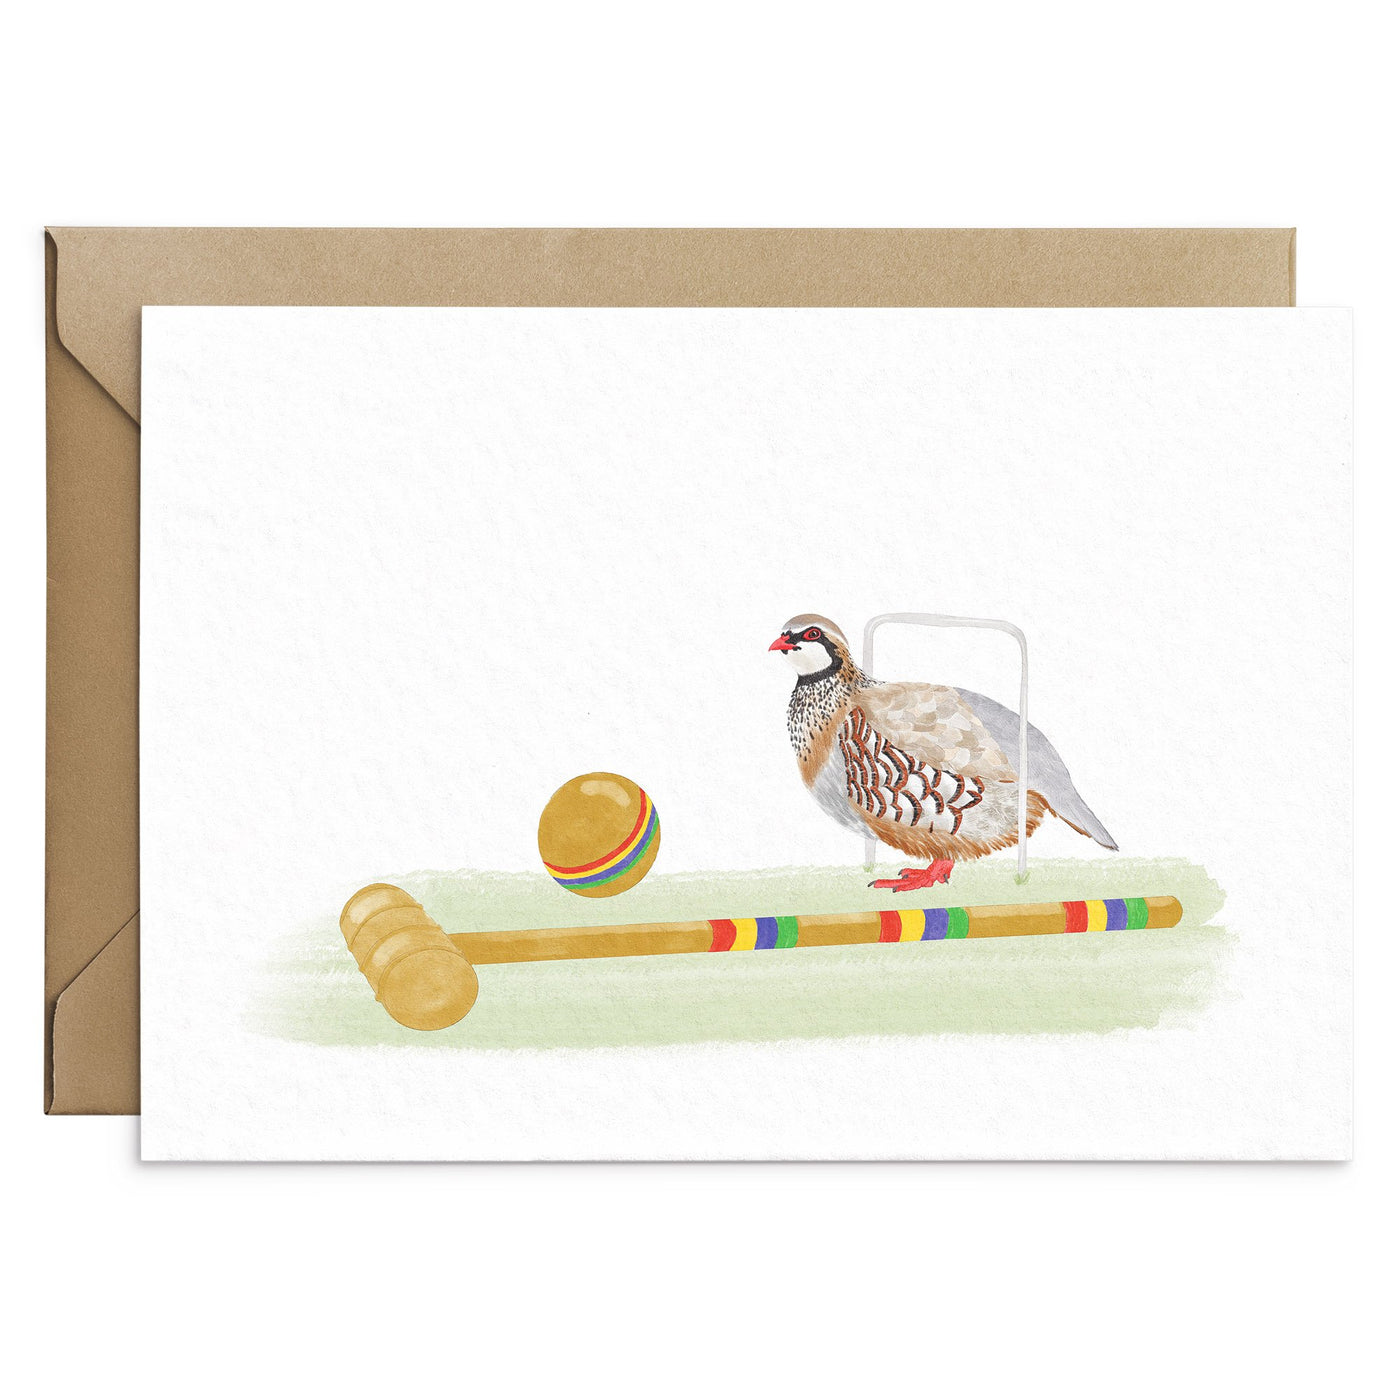 Partridge Playing Croquet Card - Poppins & Co.